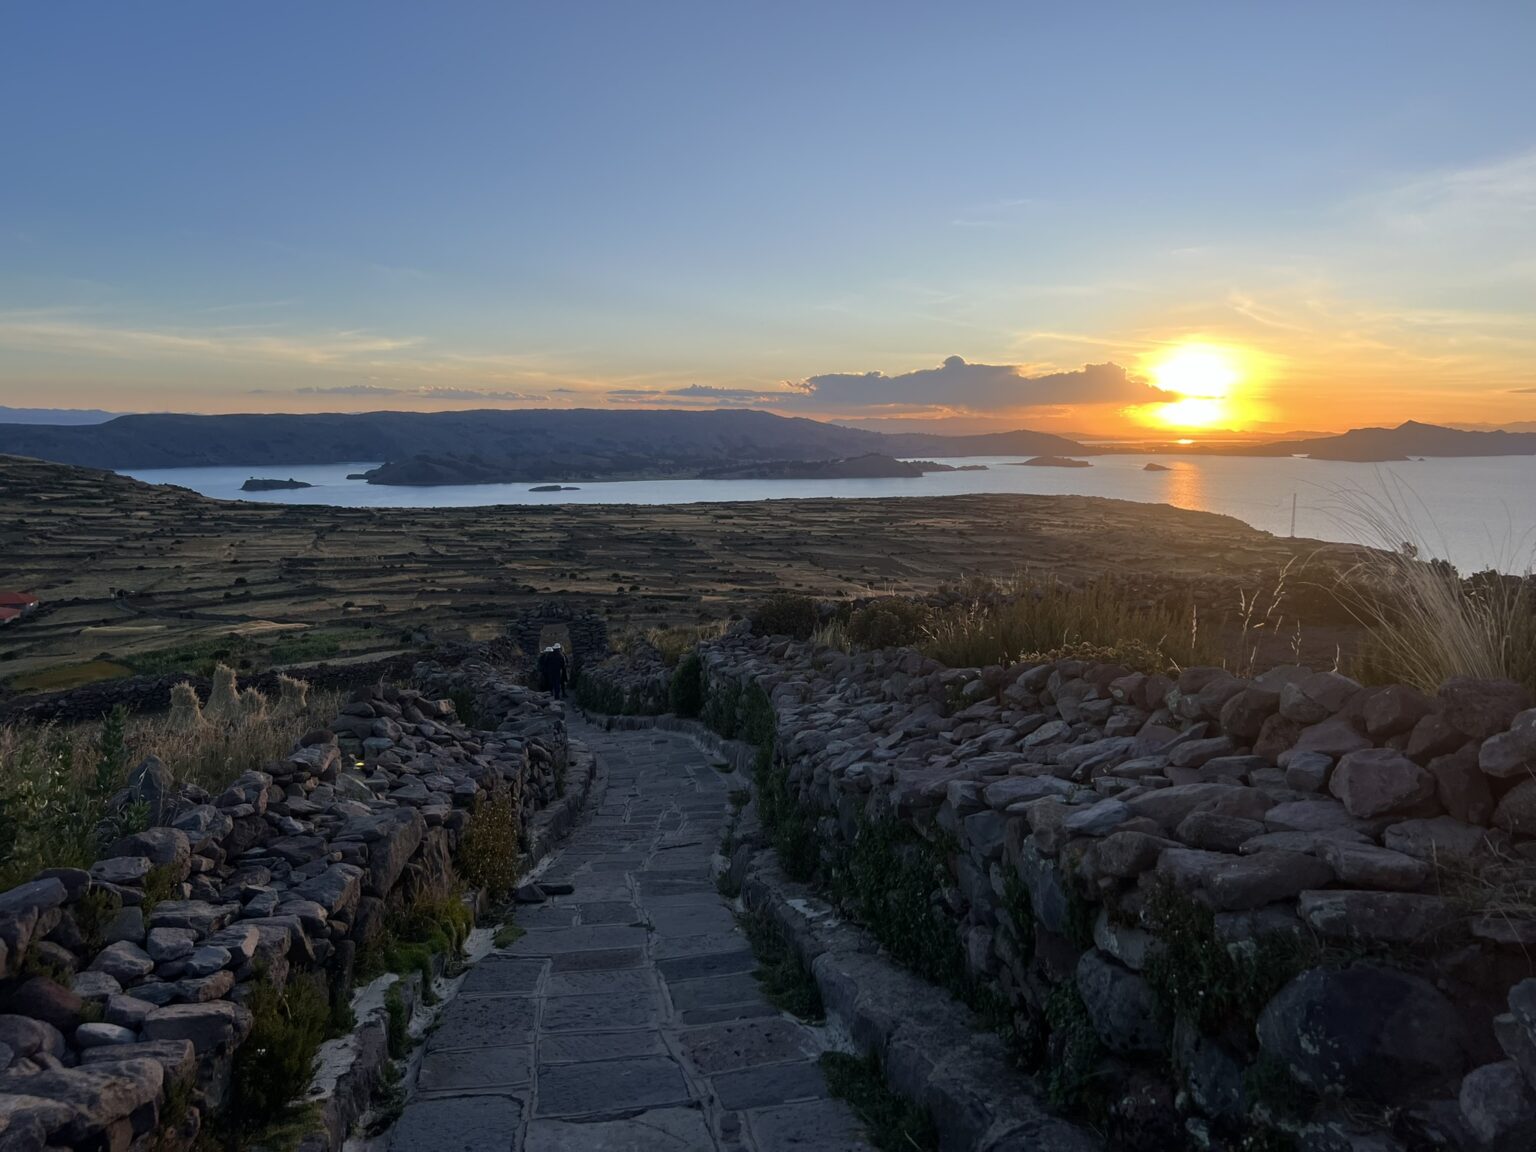 The sunset, as seen from the Pachamama temple on Amantani Island